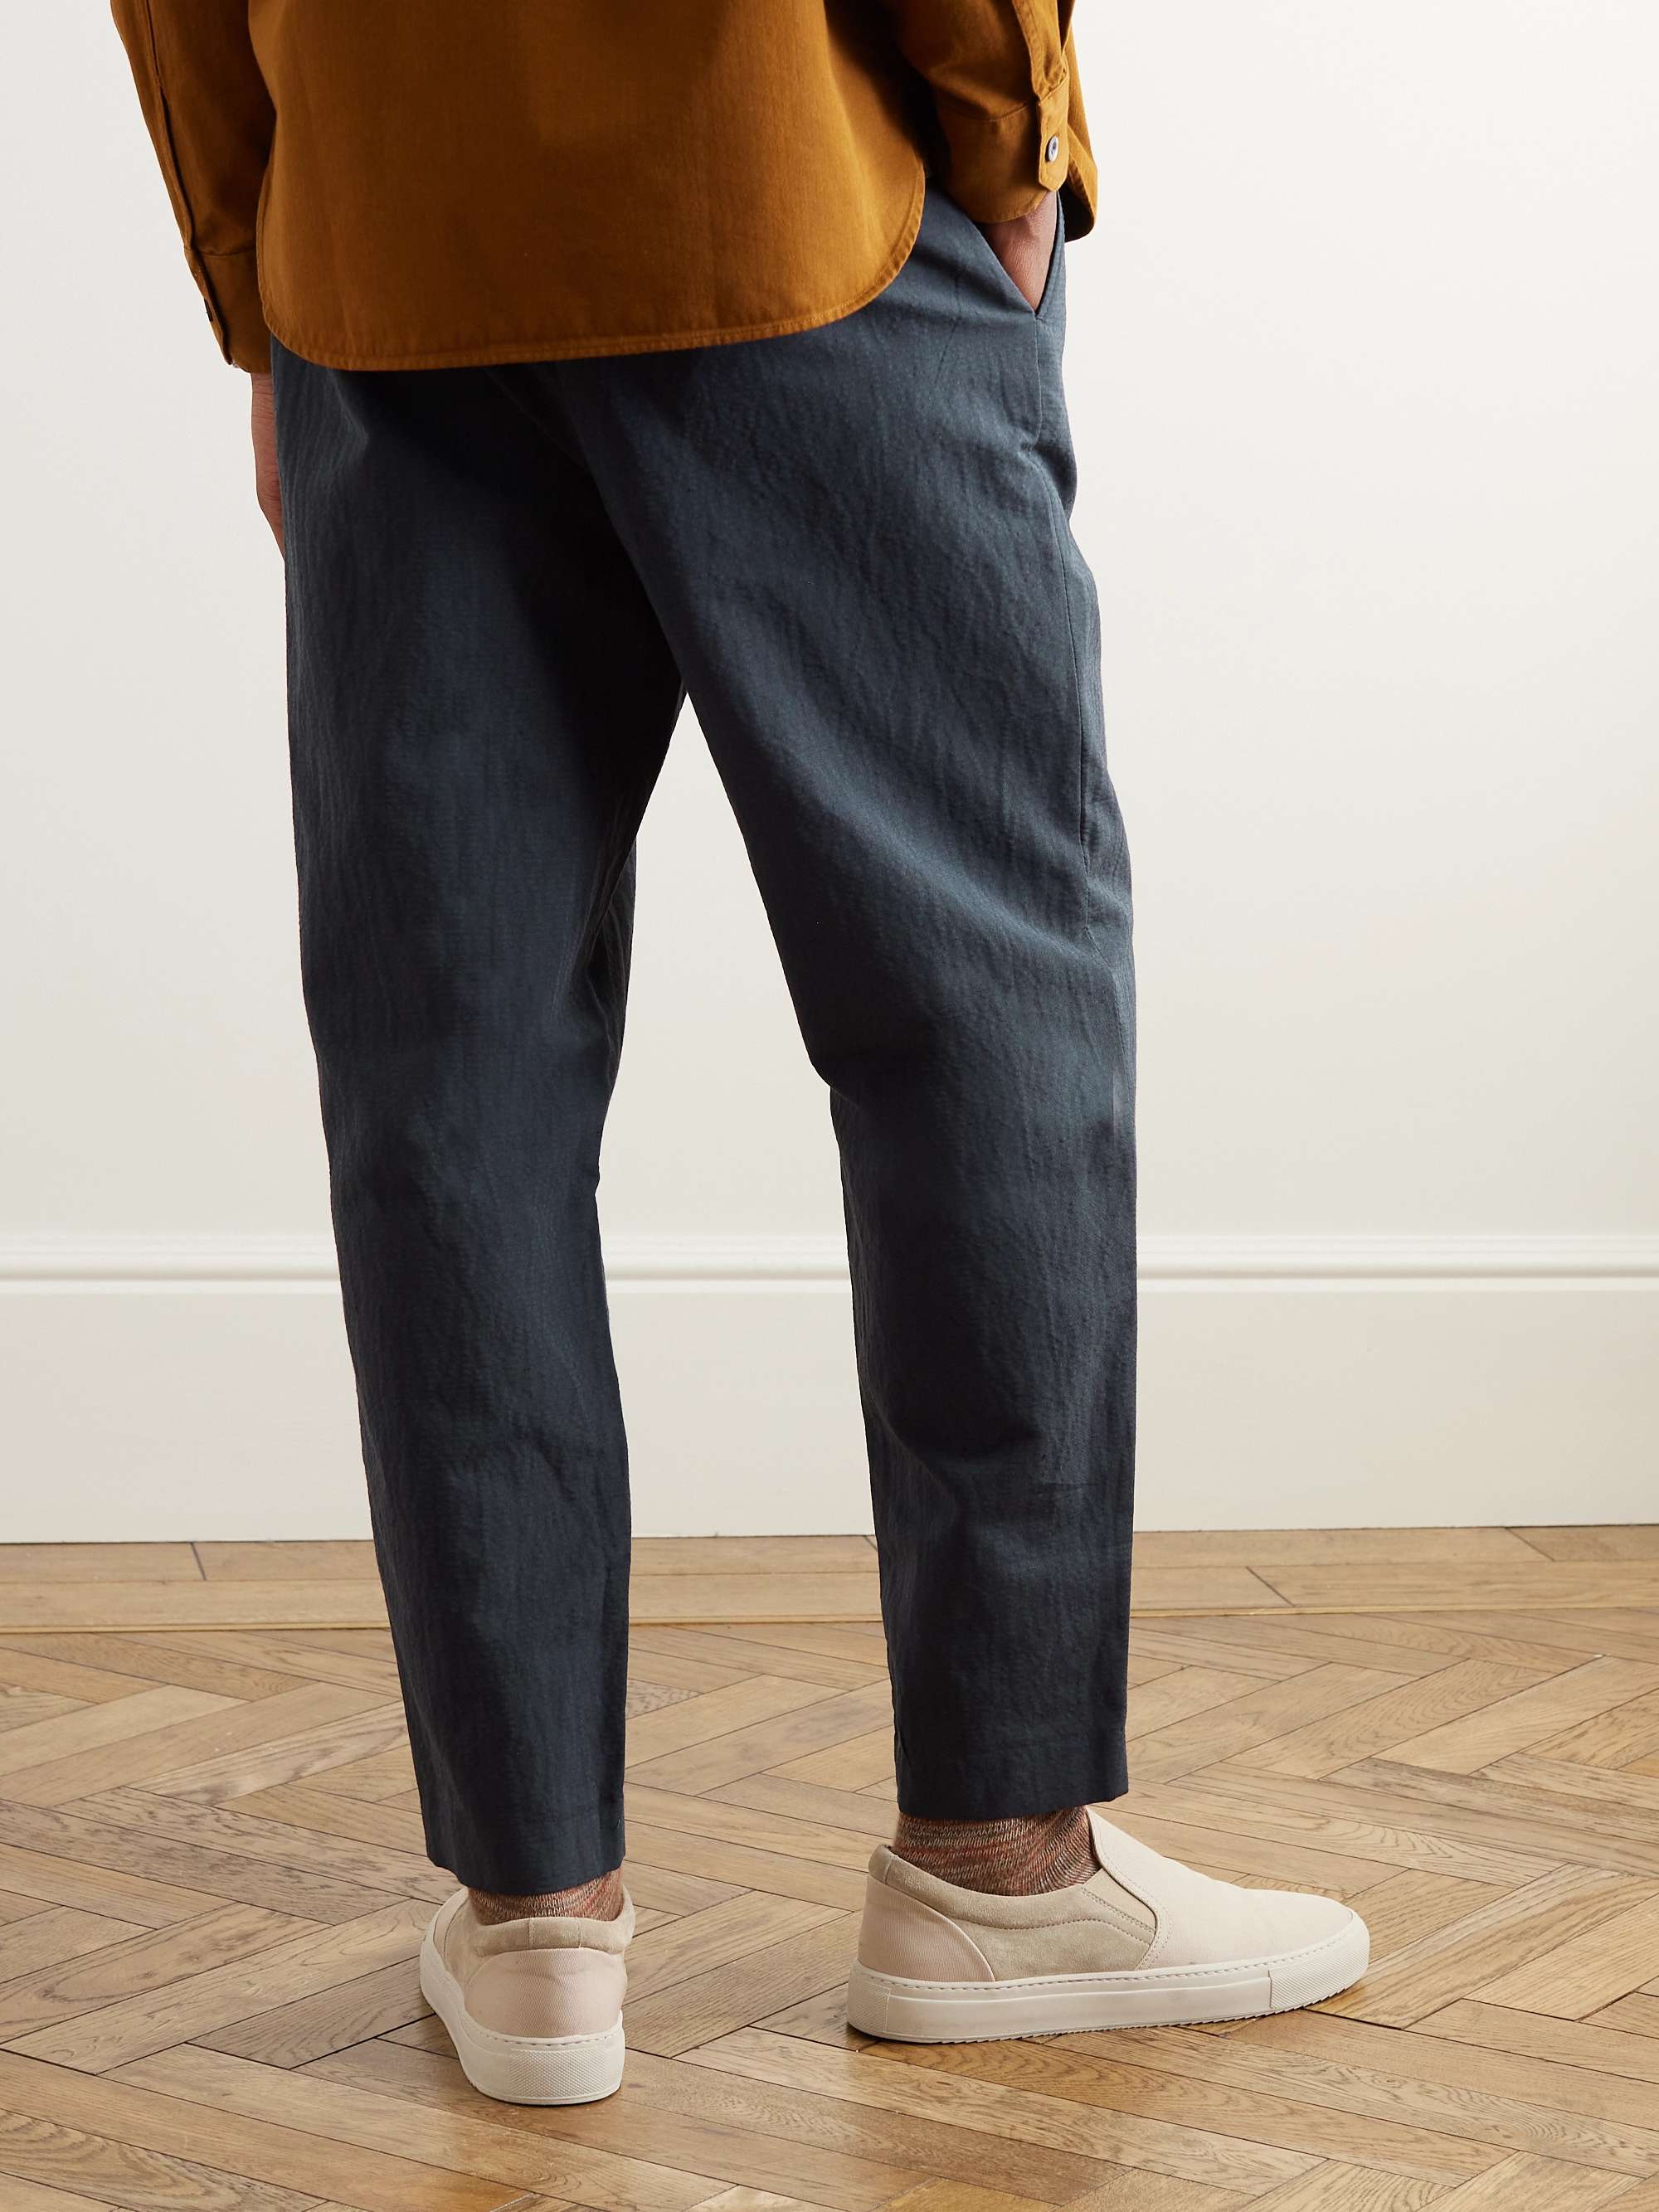 MR P. James Tapered Garment-Dyed Cotton and Linen-Blend Trousers for ...